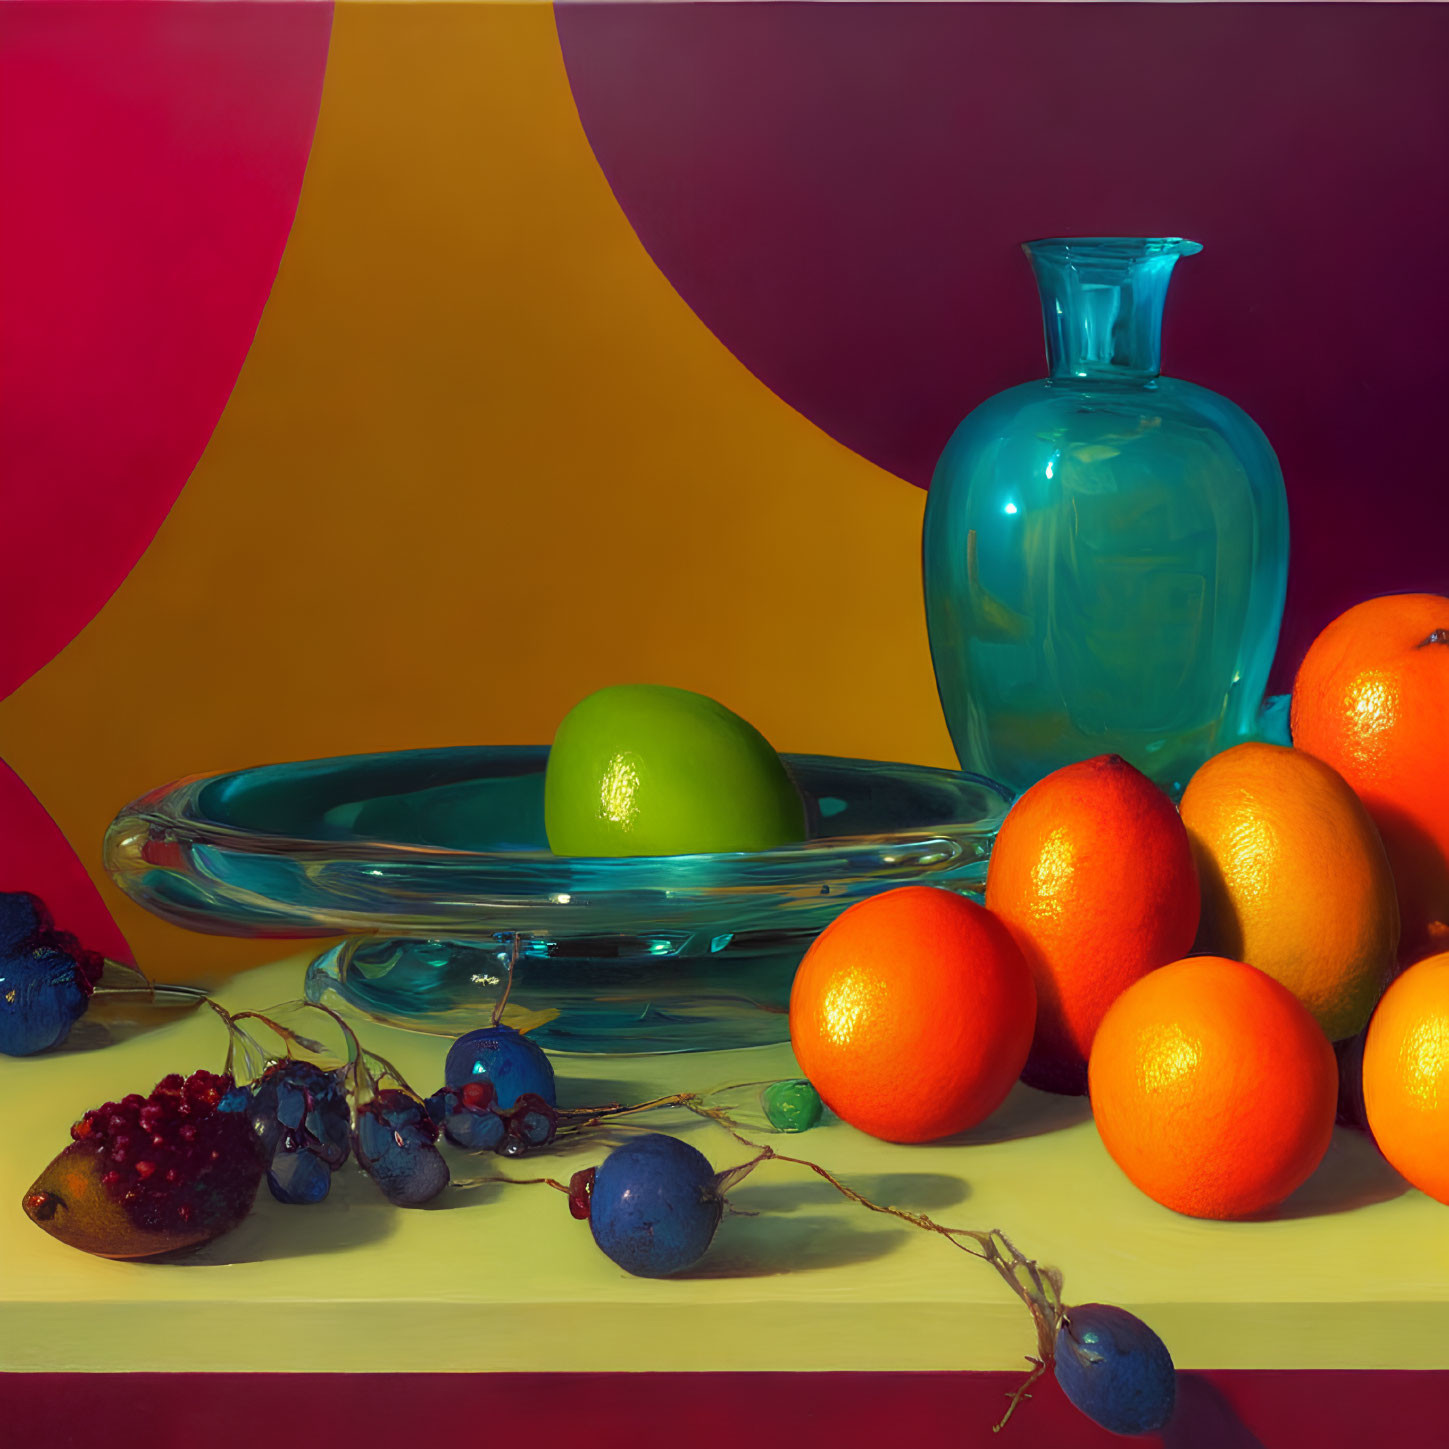 Vibrant fruit still life with blue vase and dish on yellow and red background